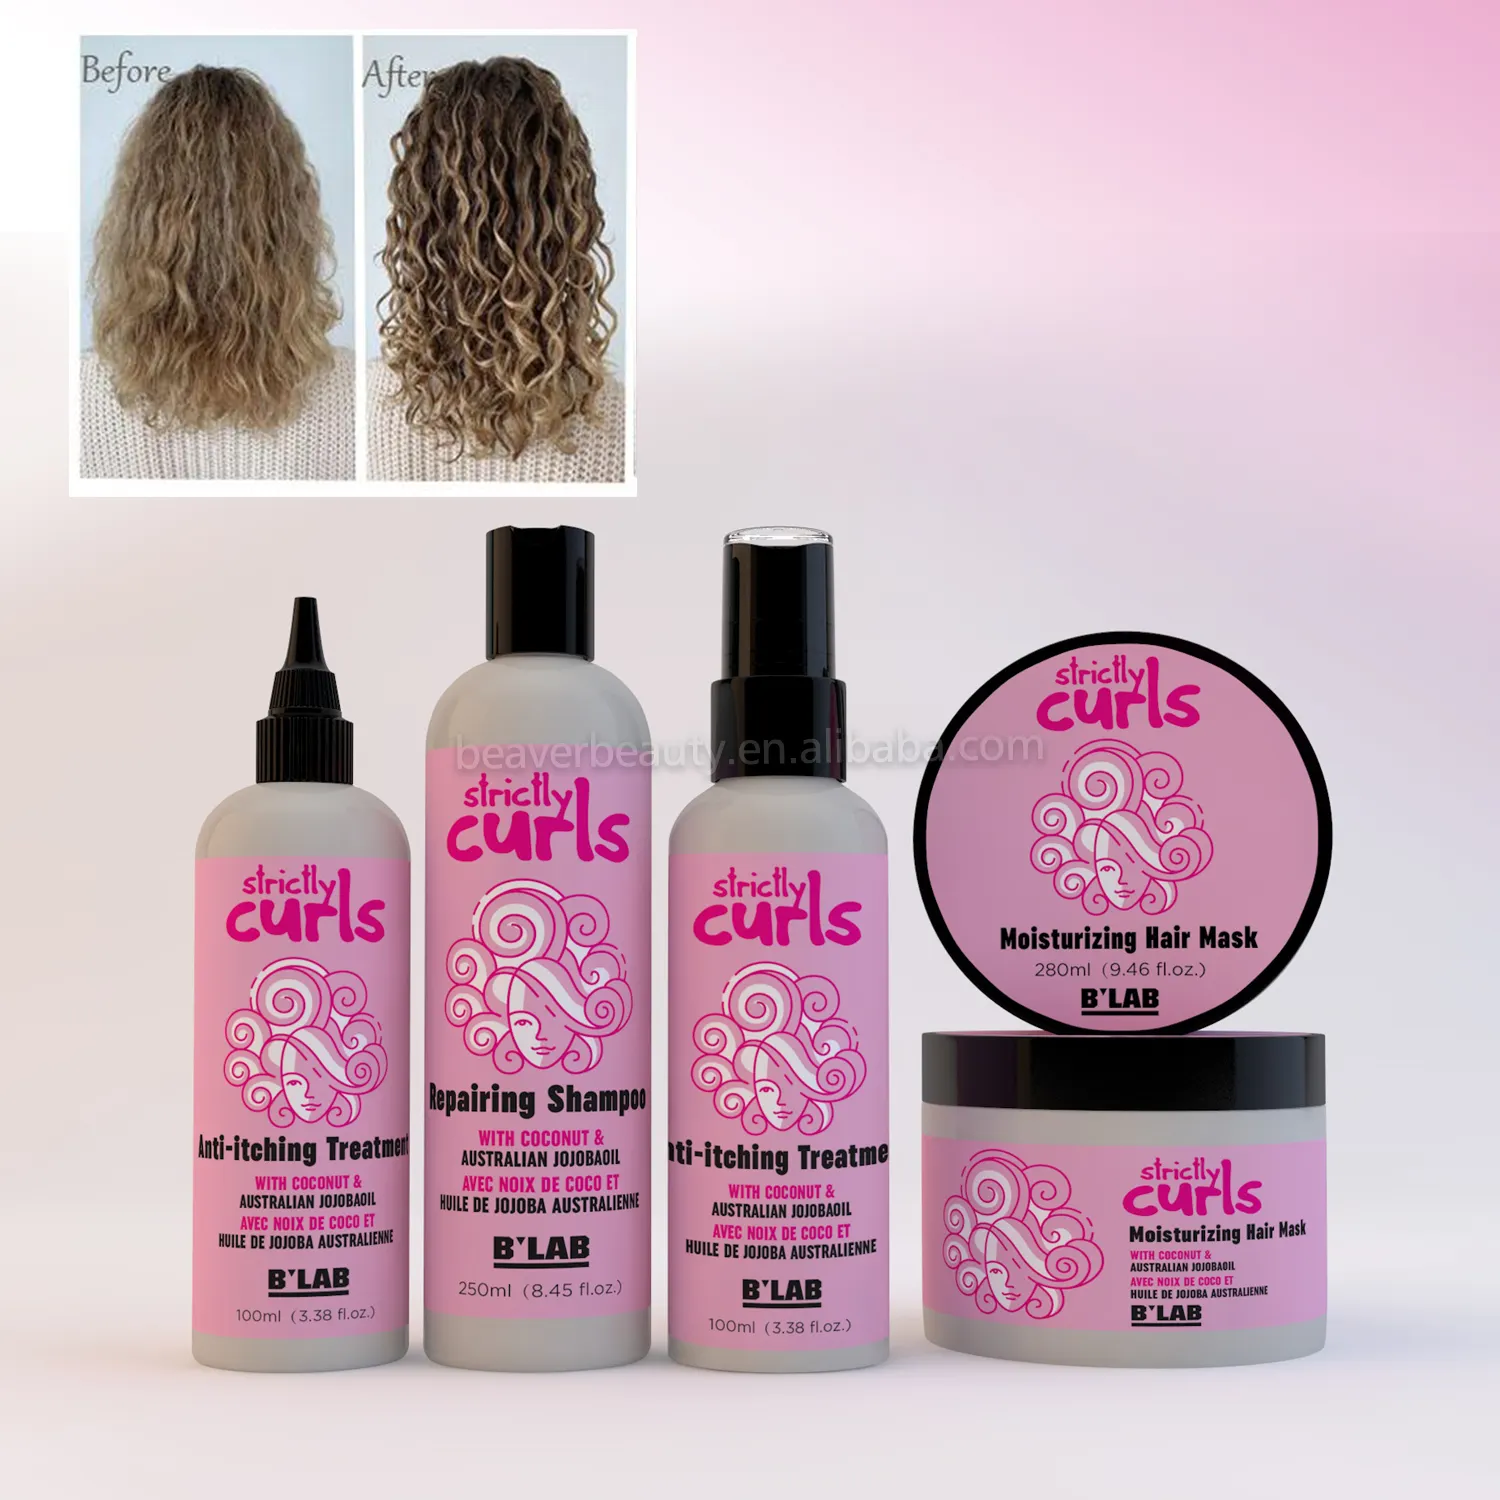 Private Label Customize Natural Keratin Hair Curling Cream 4c Black Hair Care Products for Curly Hair Care Set